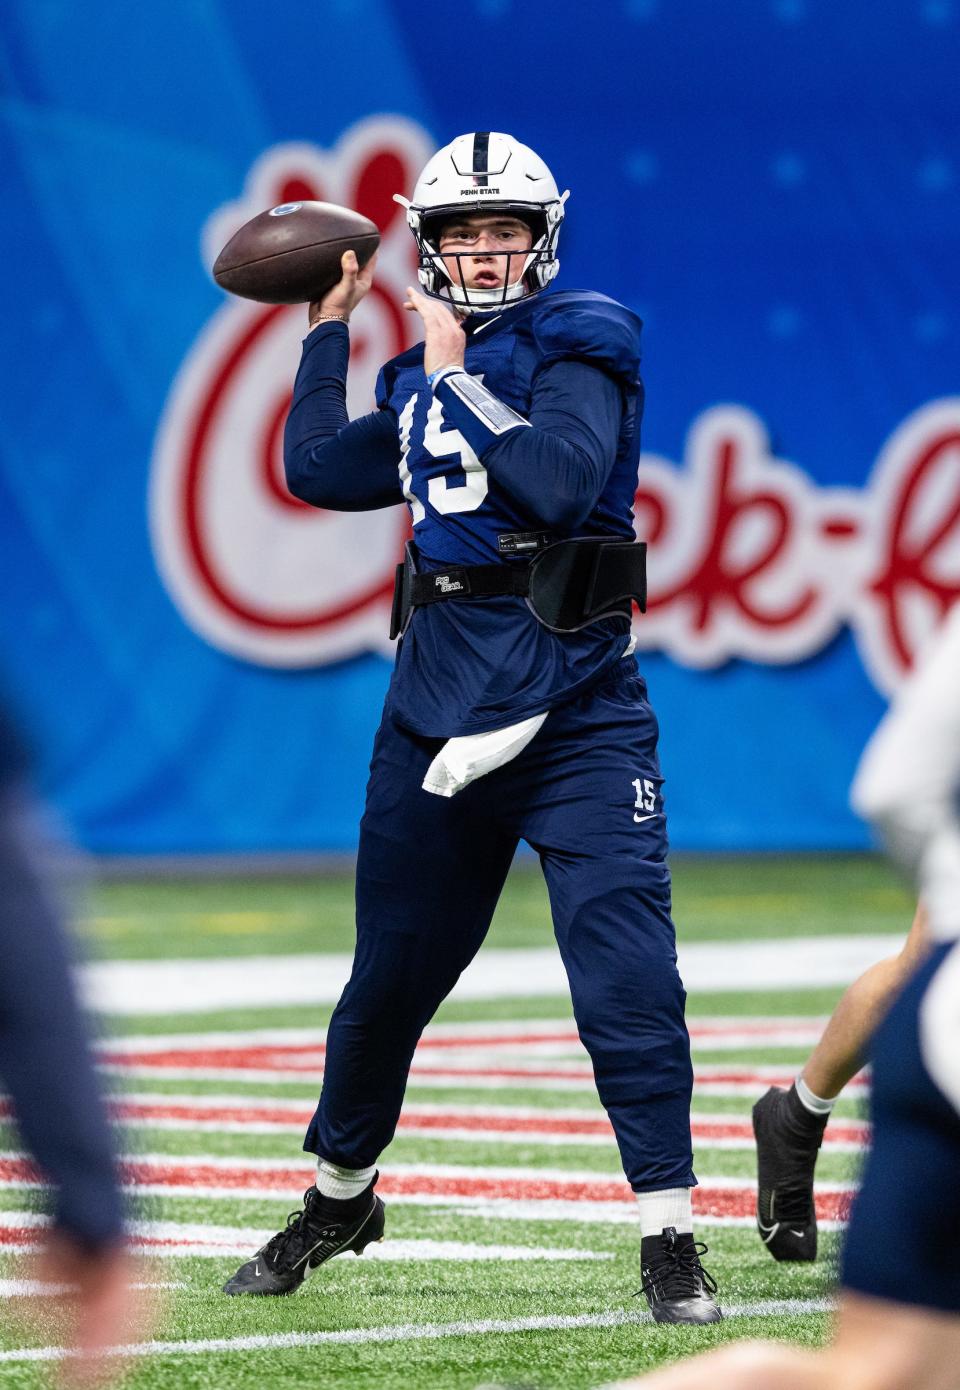 Penn State quarterback Drew Allar looks to build upon a strong, uplifting finish to the regular season in Saturday's Peach Bowl vs. Ole Miss. (Jason Parkhurst via Abell Images for the Chick-fil-A Peach Bowl)